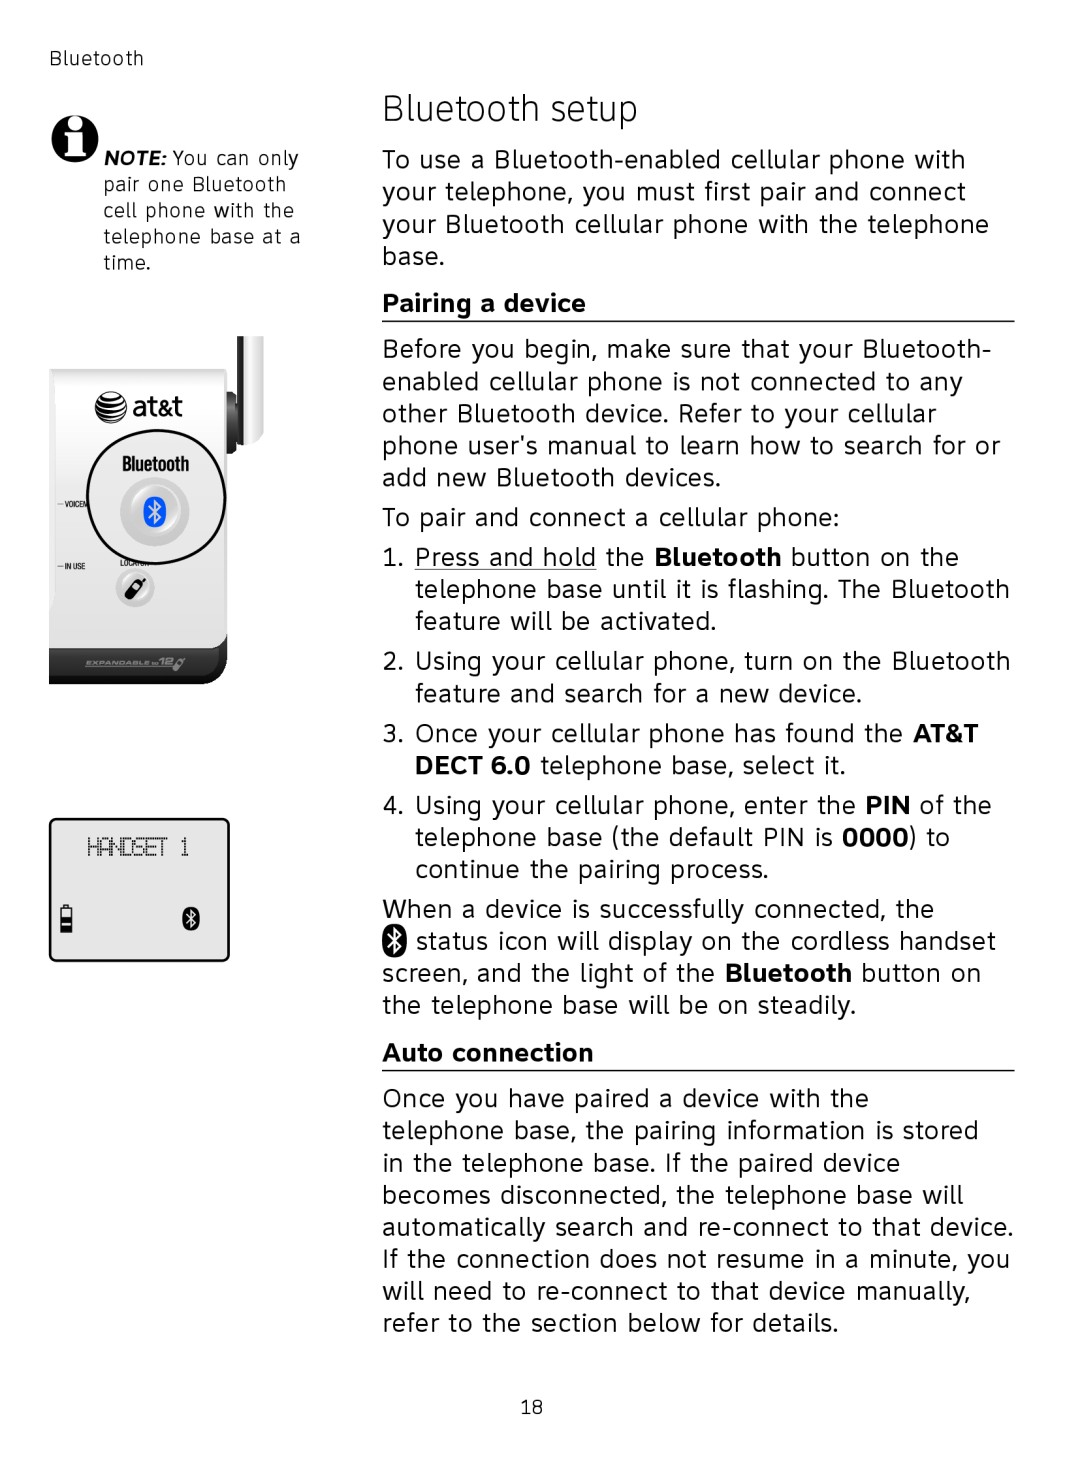 AT&T TL91278, TL9178, TL91378, TL91178 user manual Bluetooth setup, Pairing a device, Auto connection 